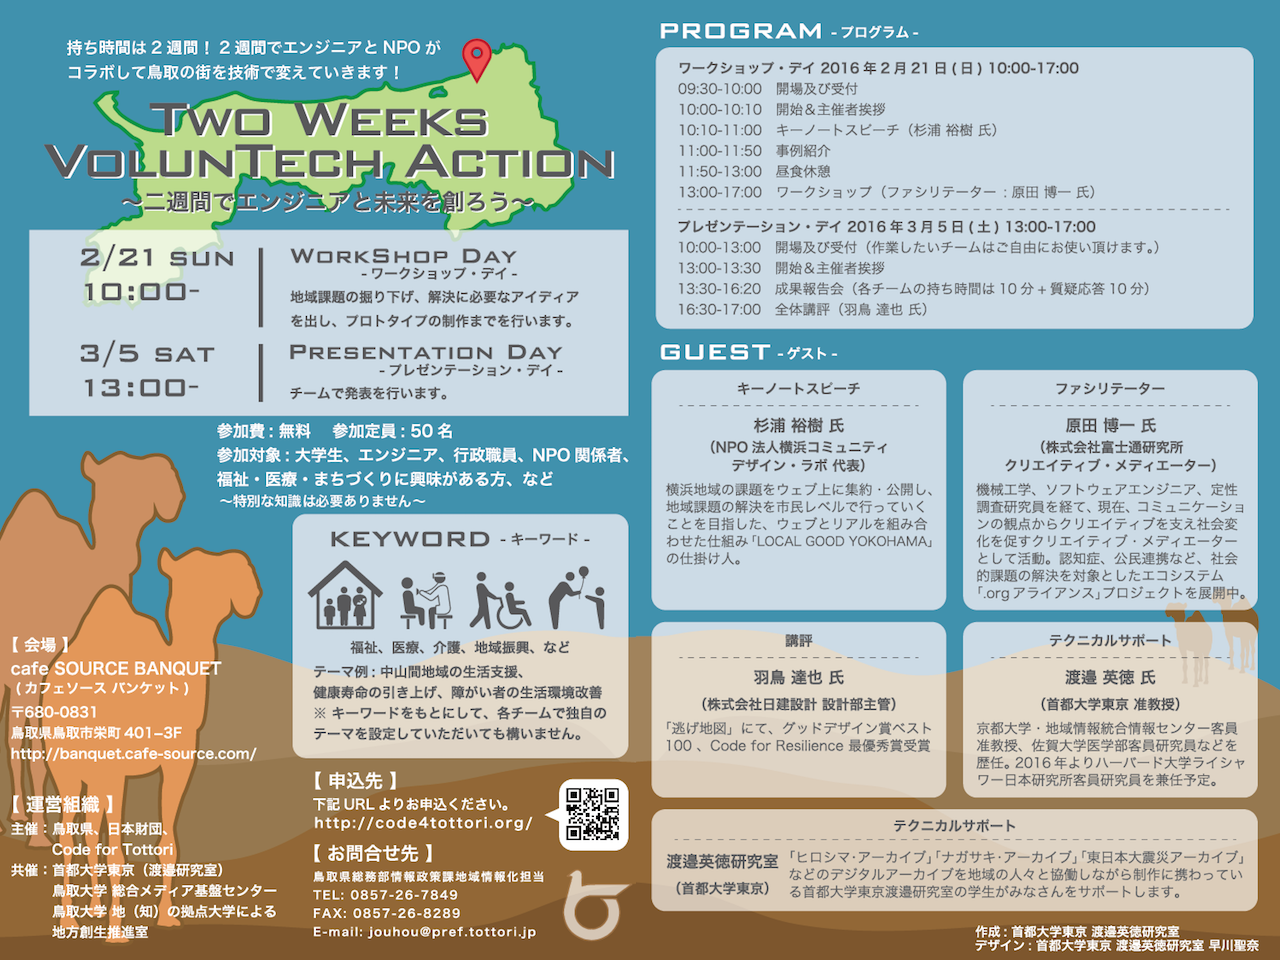 Two Weeks VolunTech Action〜二週間でエンジニアと未来を創ろう〜